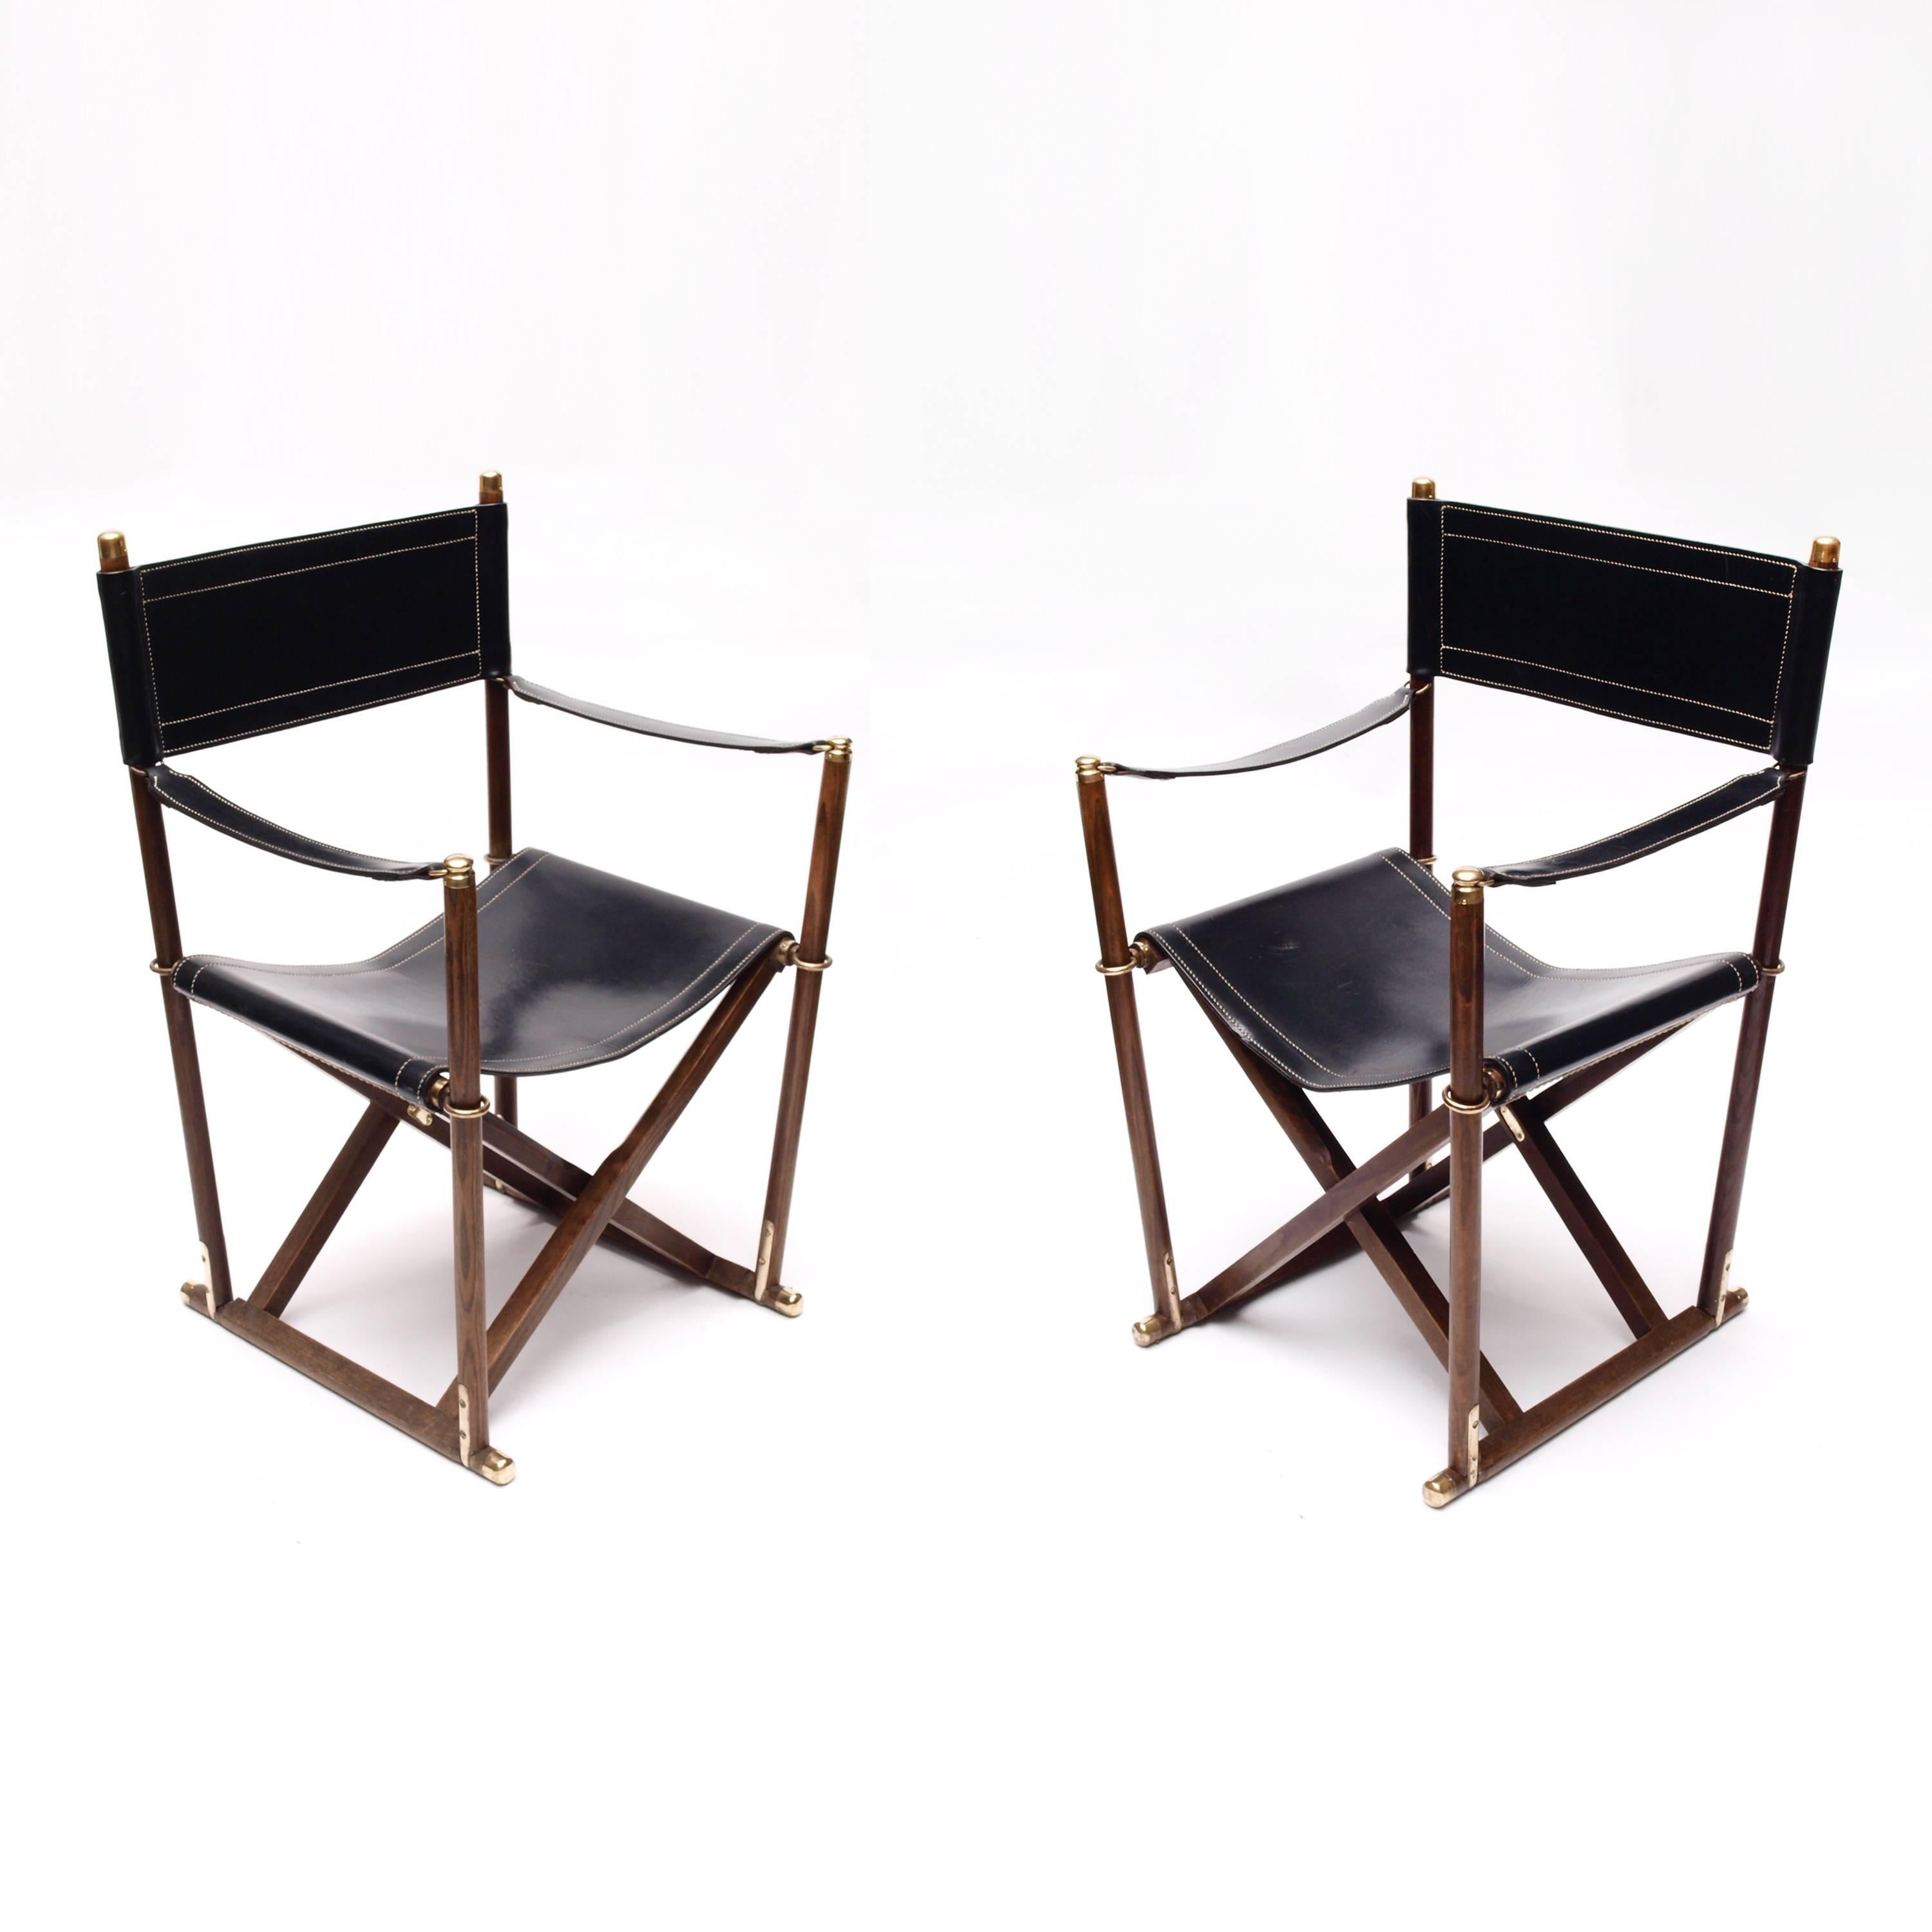 An important pair of handmade Mogens Koch folding Campaign chairs. Originally designed in 1932 as temporary church seating, this pair of scarce and historically important chairs date from the 1930s, and were only available as made-to-order at this